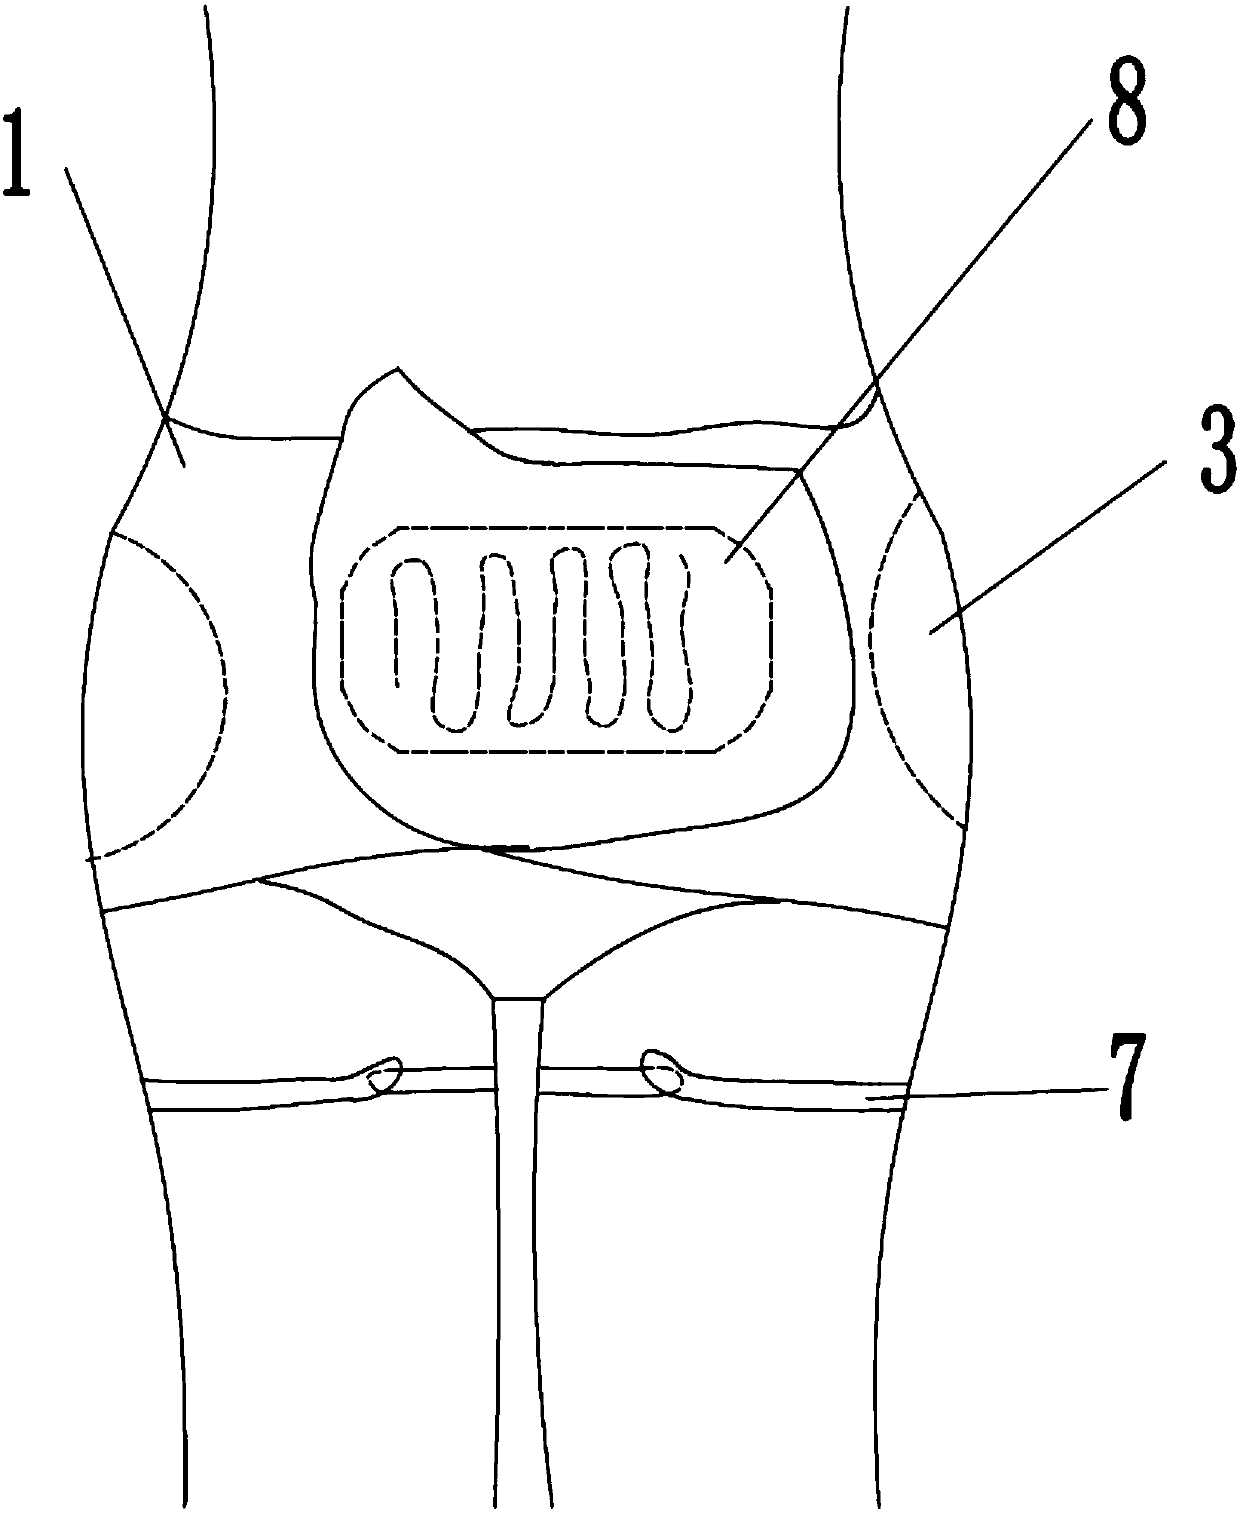 Buttock shrinking device